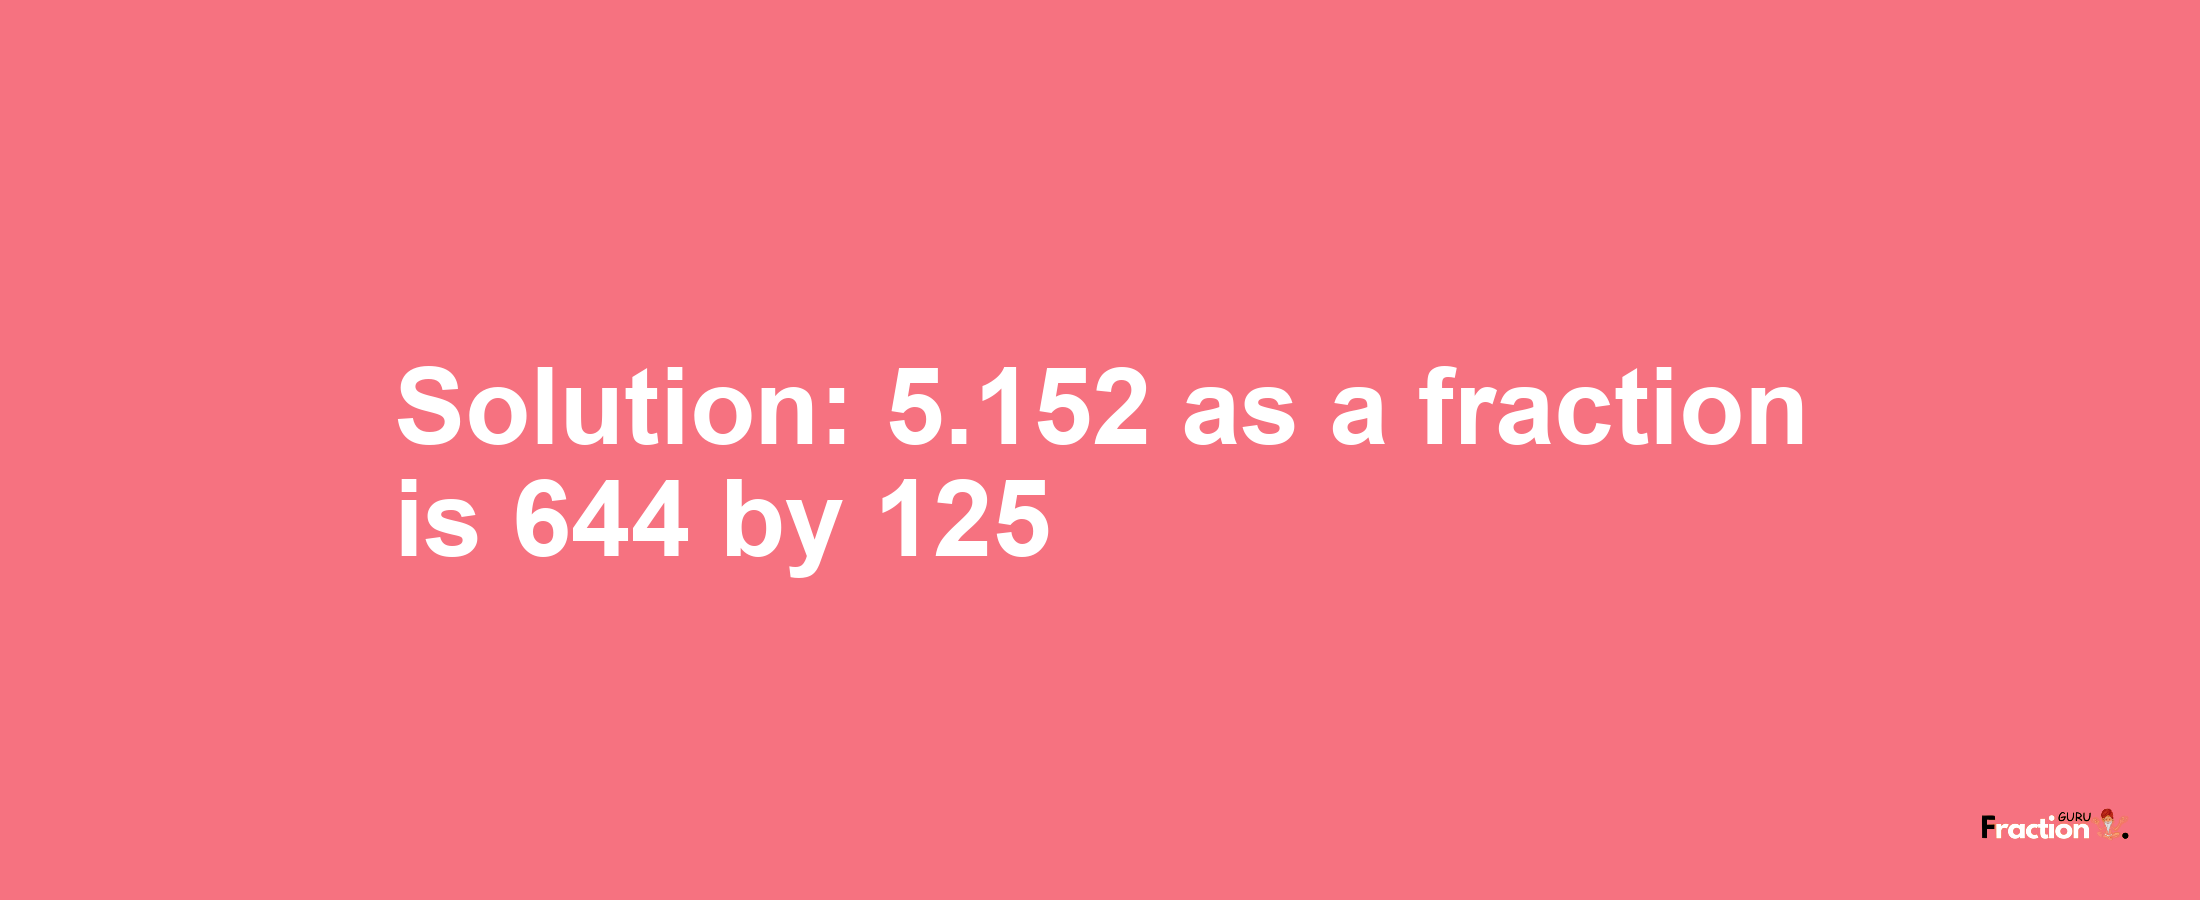 Solution:5.152 as a fraction is 644/125